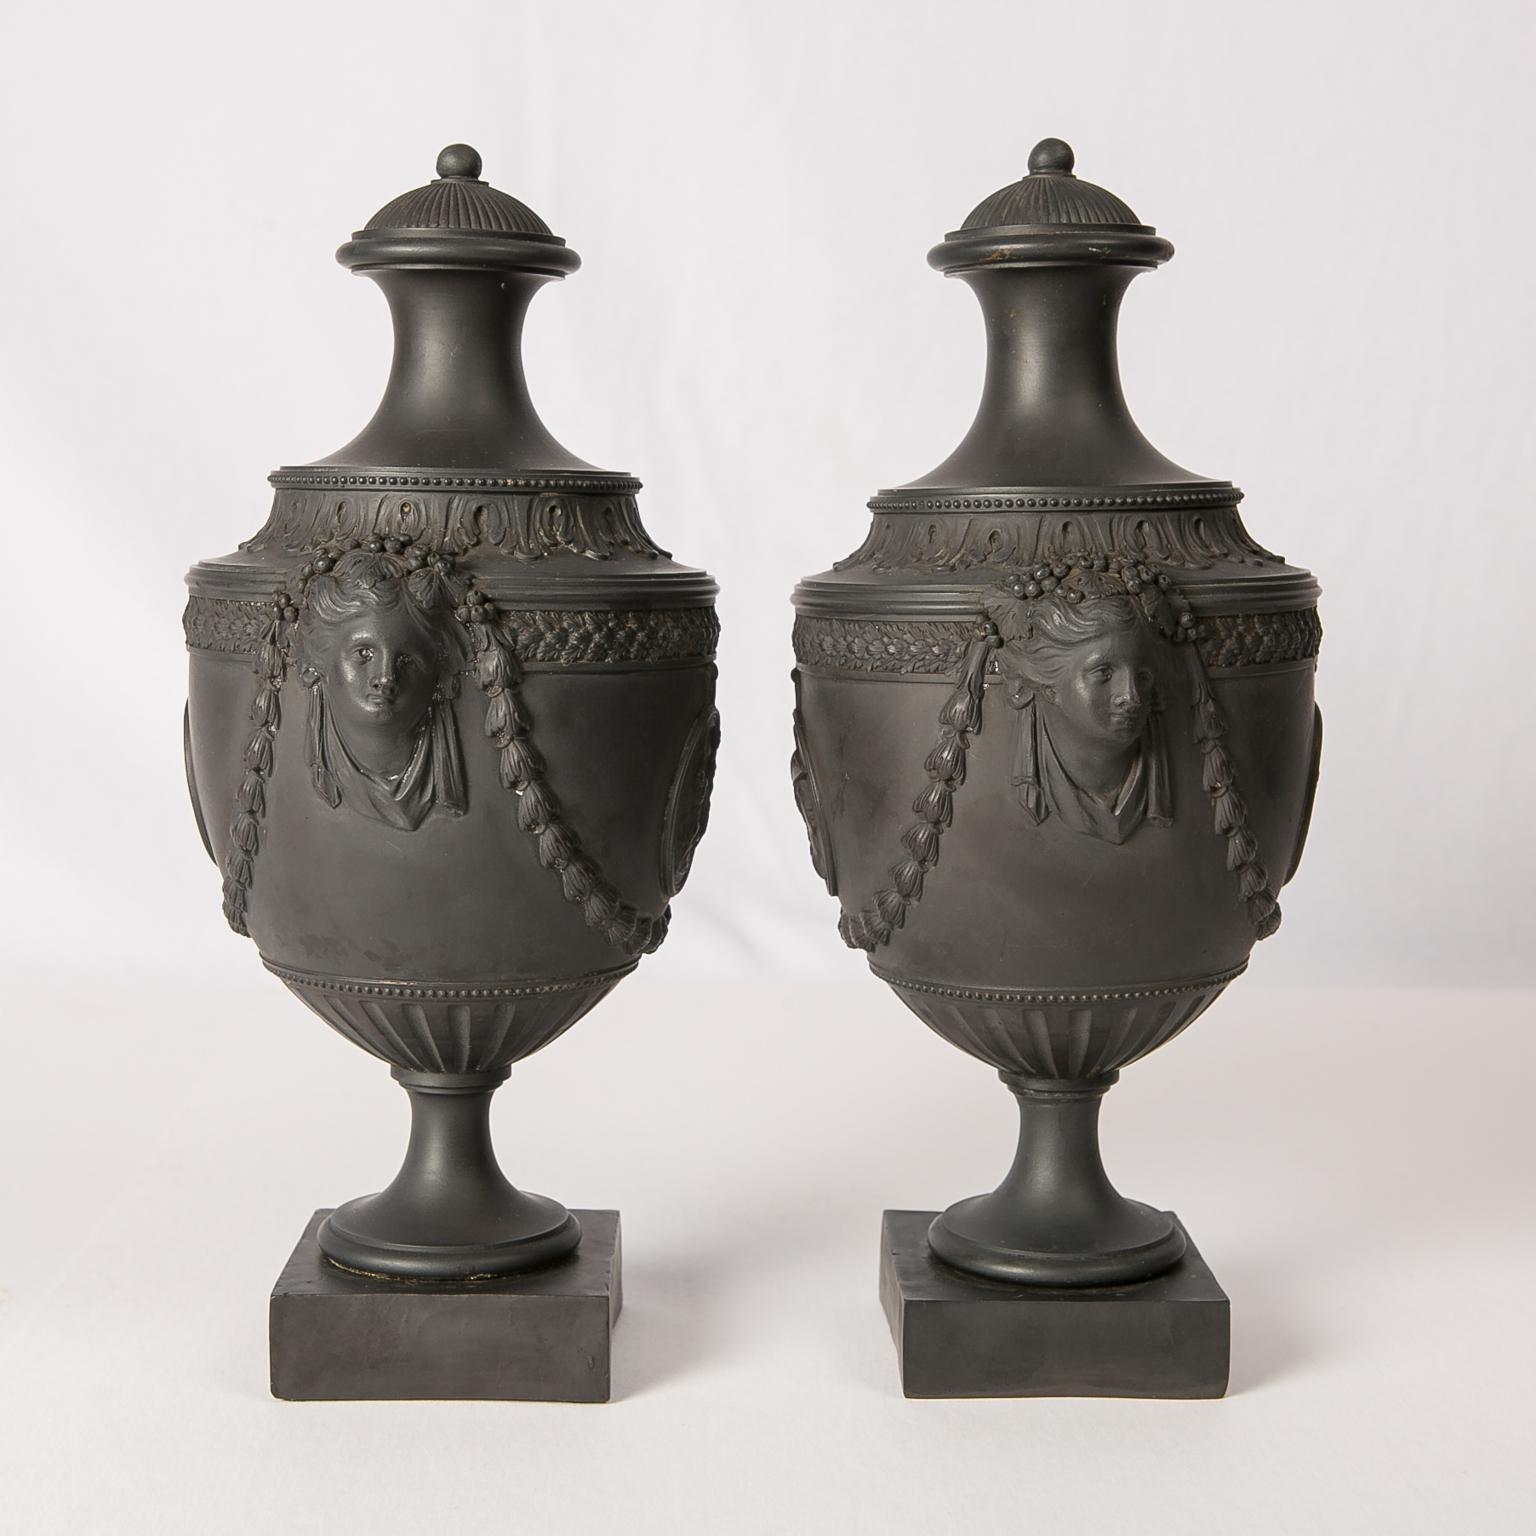 A pair of Black Basalt covered urns made by H. Palmer of Hanley Staffordshire in the 18th century, circa 1775. 
This pair of vases is a gem of the neoclassical style. They combine beautiful molded cameos, and exceptional Cleopatra mask handles